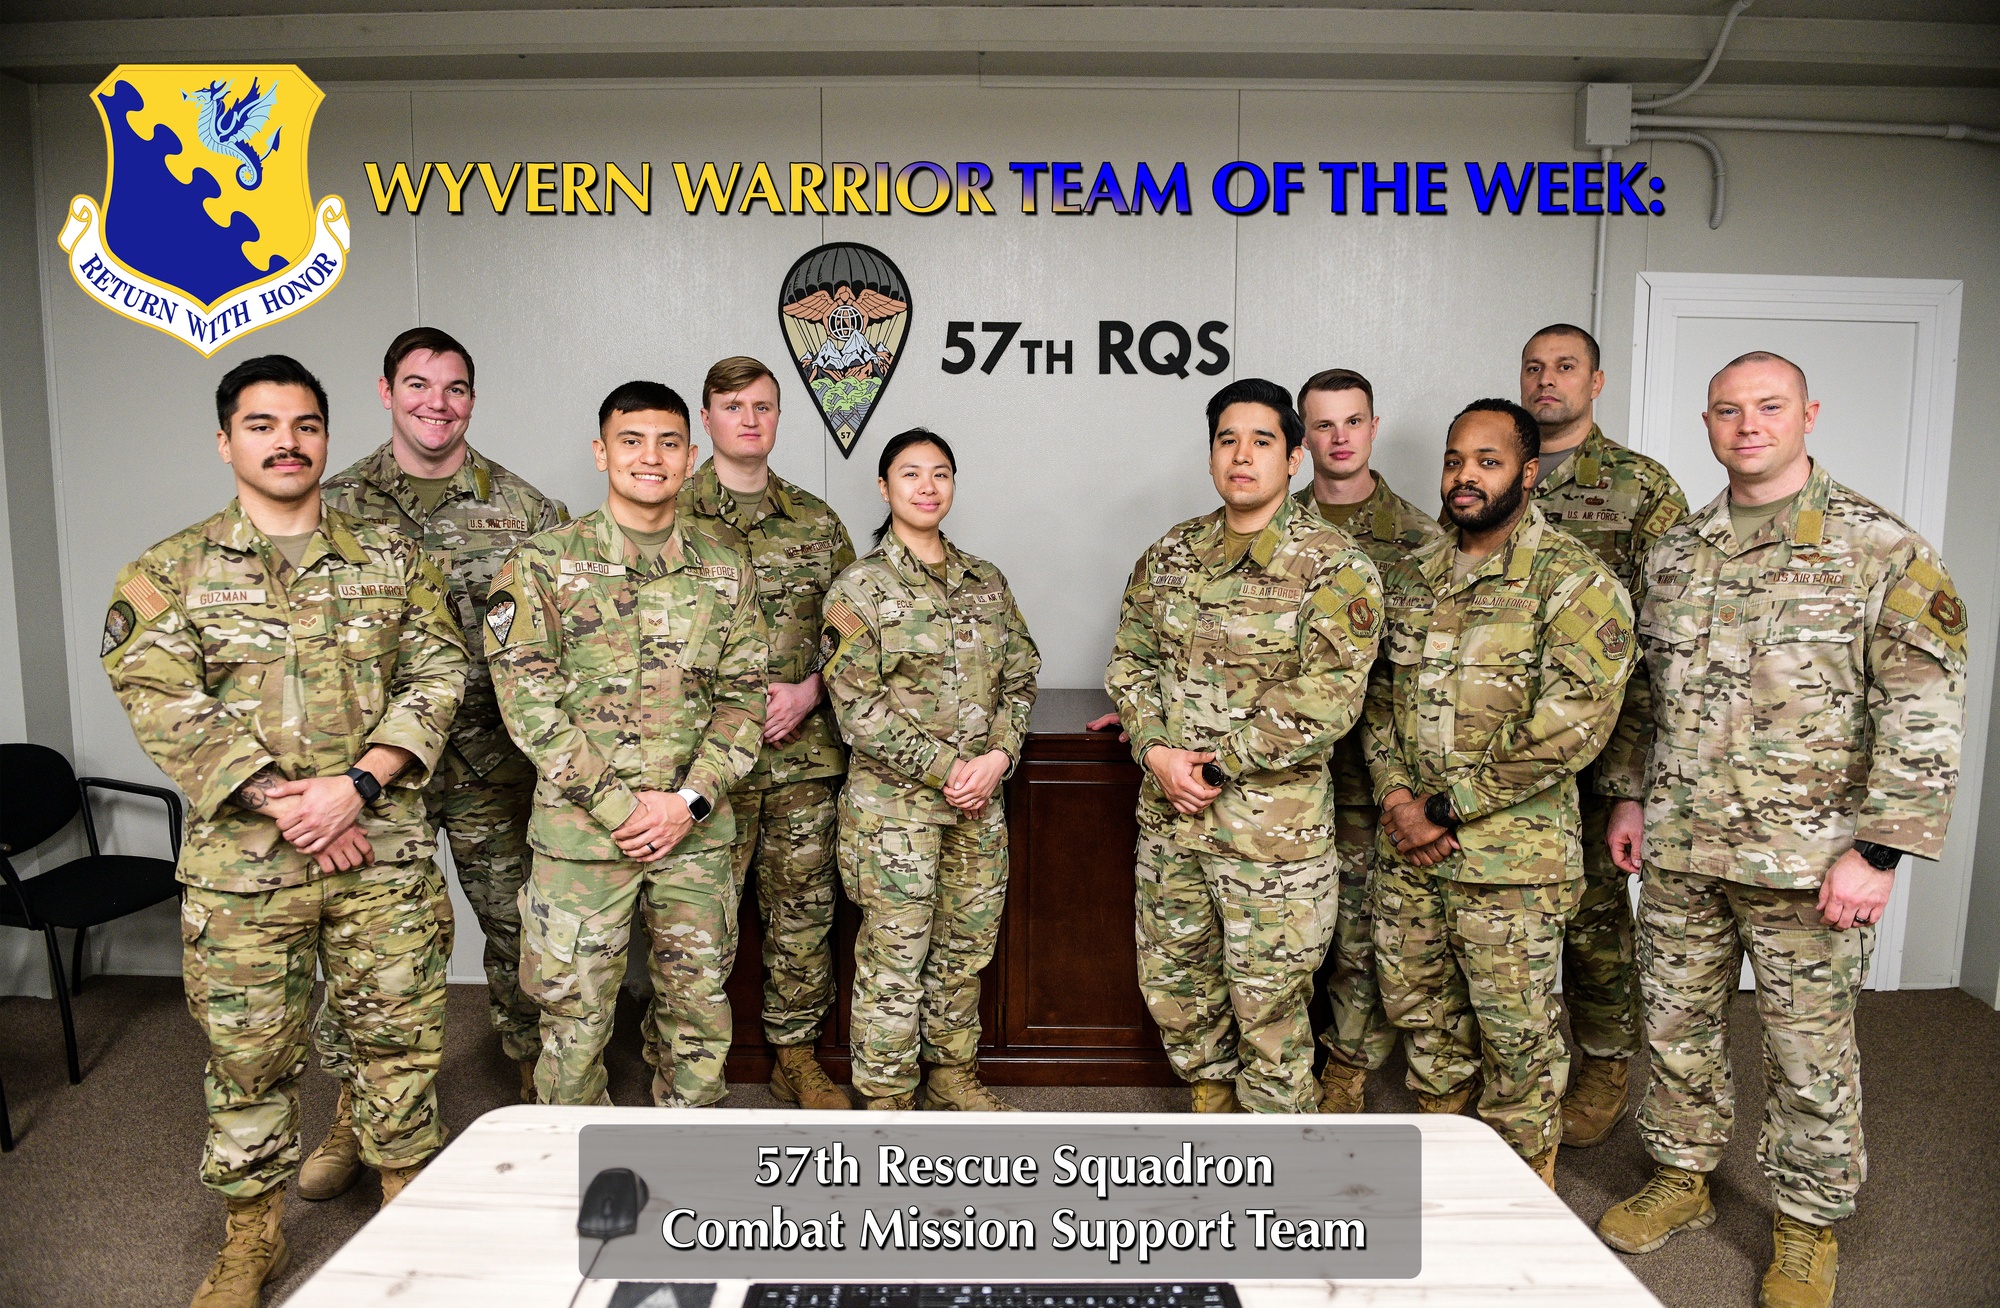 DVIDS - Images - Wyvern Warrior Team of the Week: 57th Rescue 